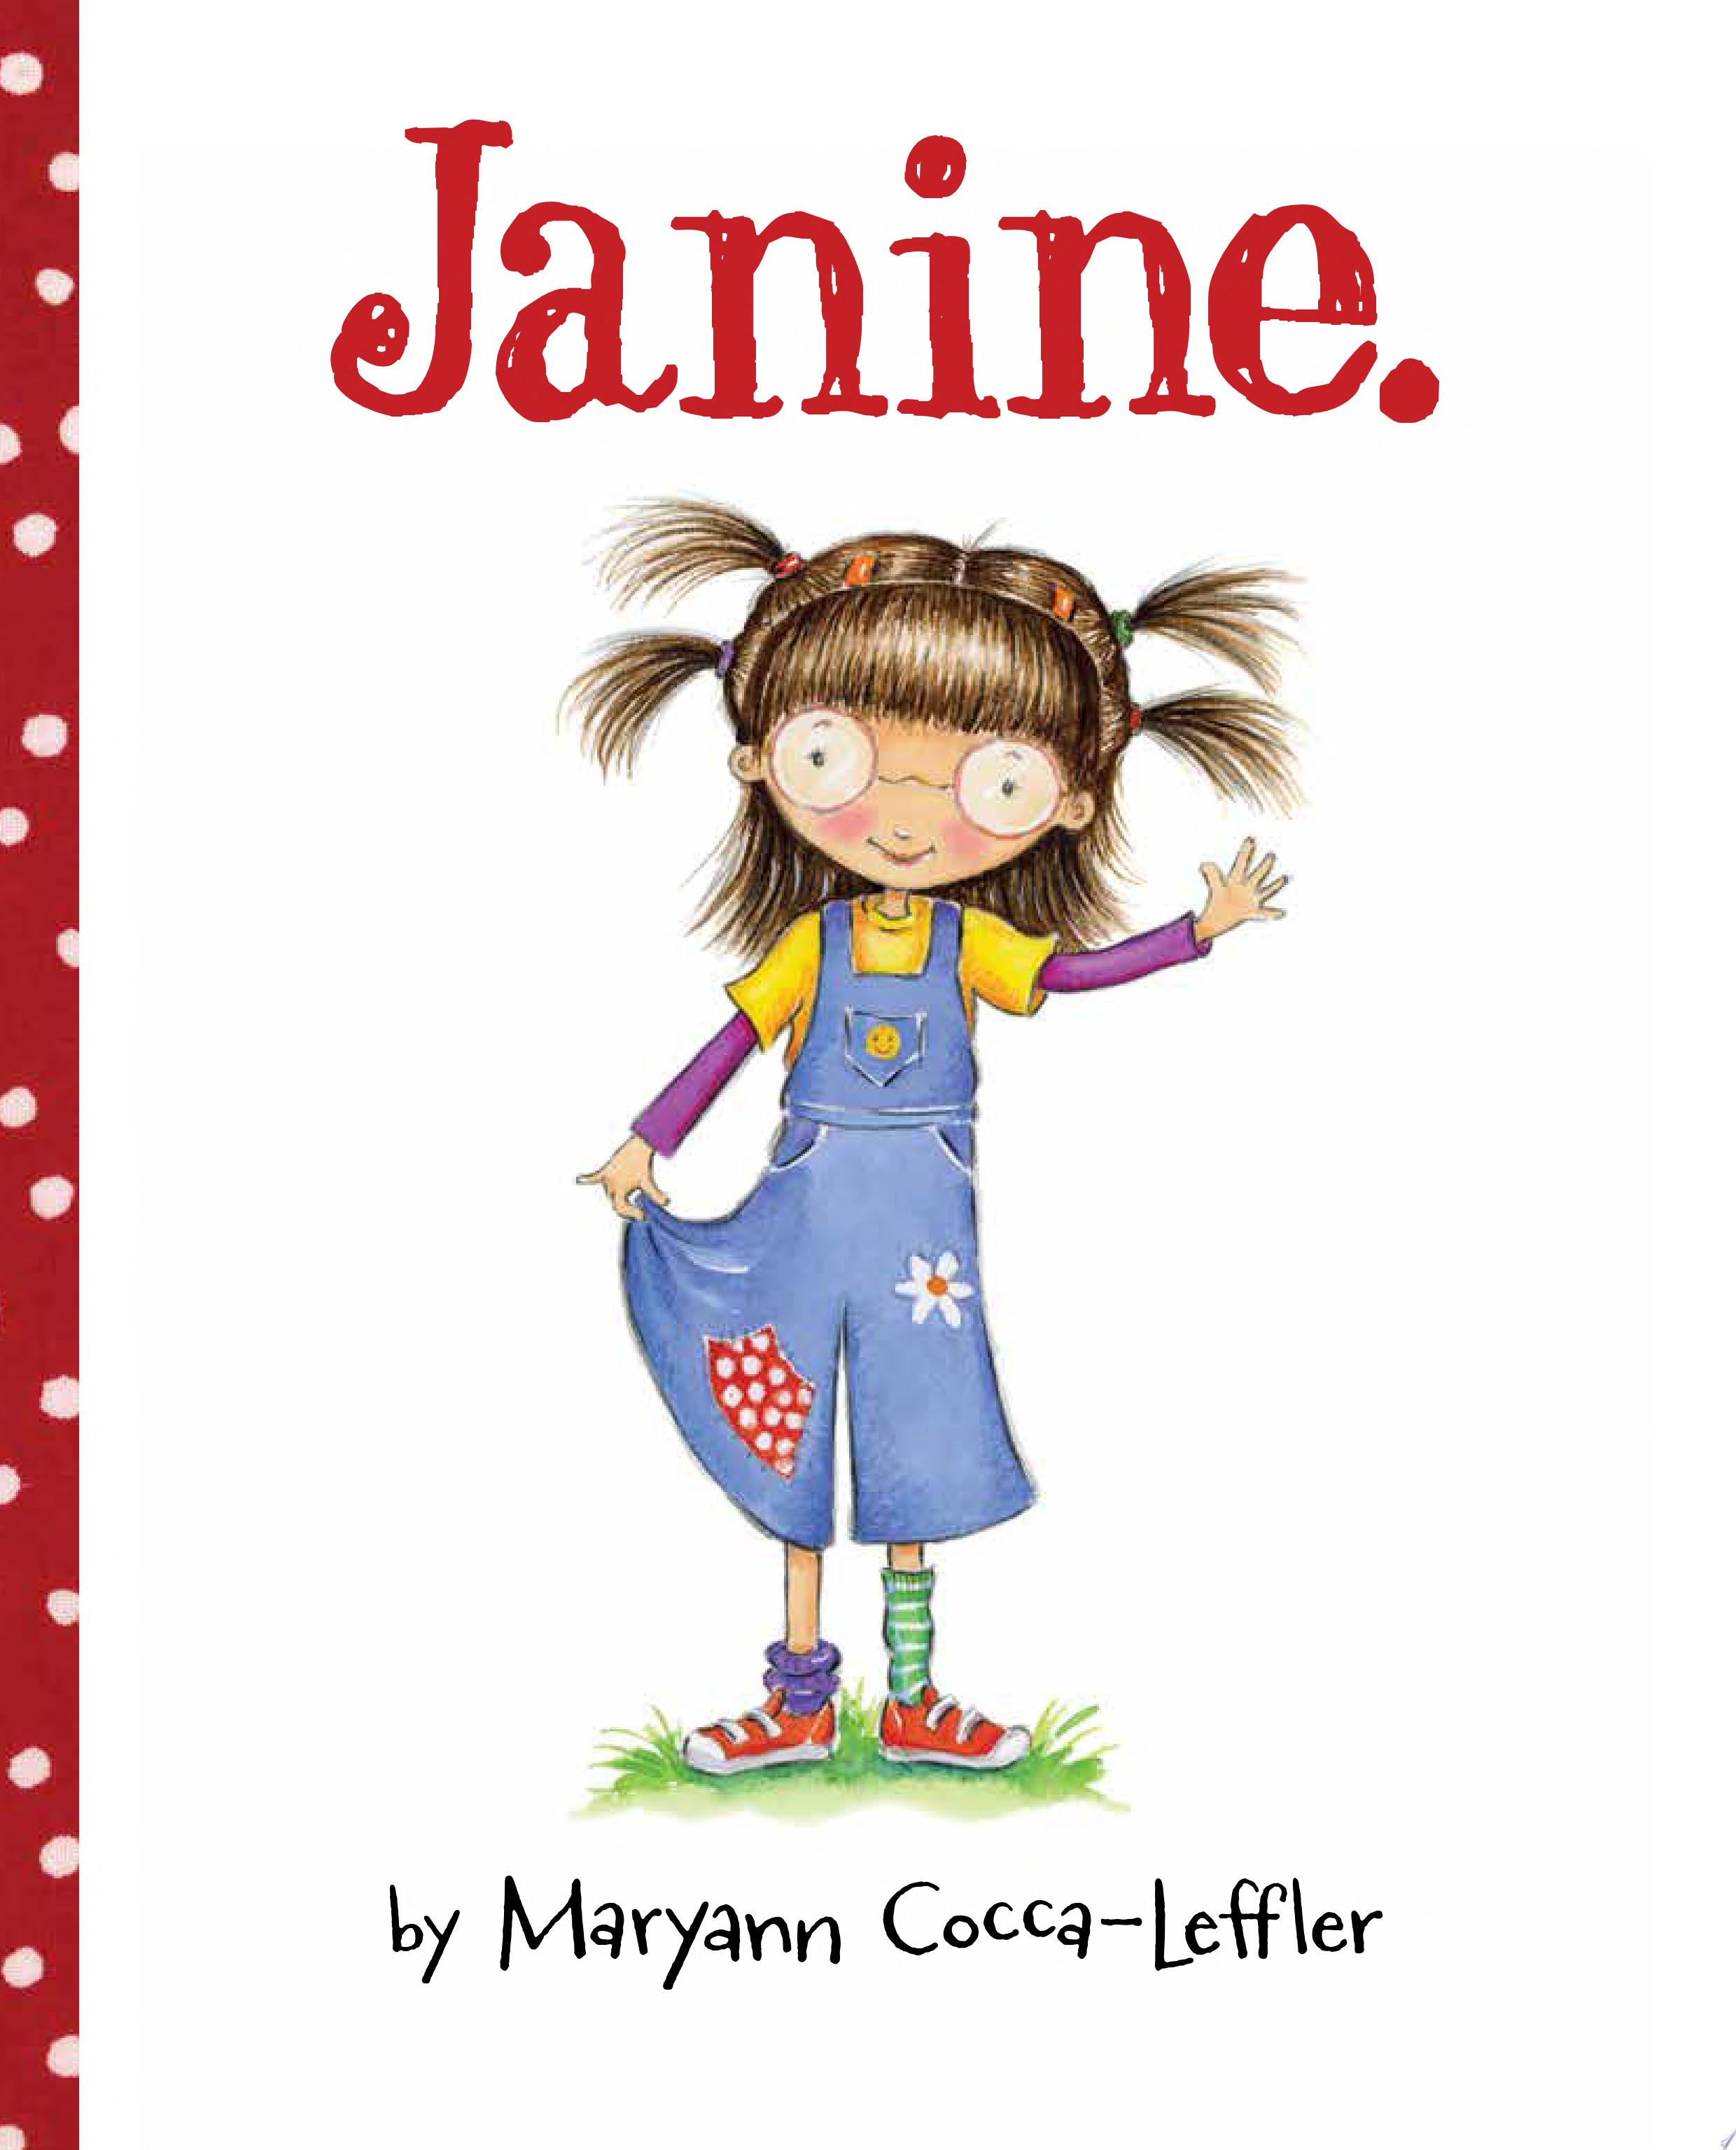 Image for "Janine."